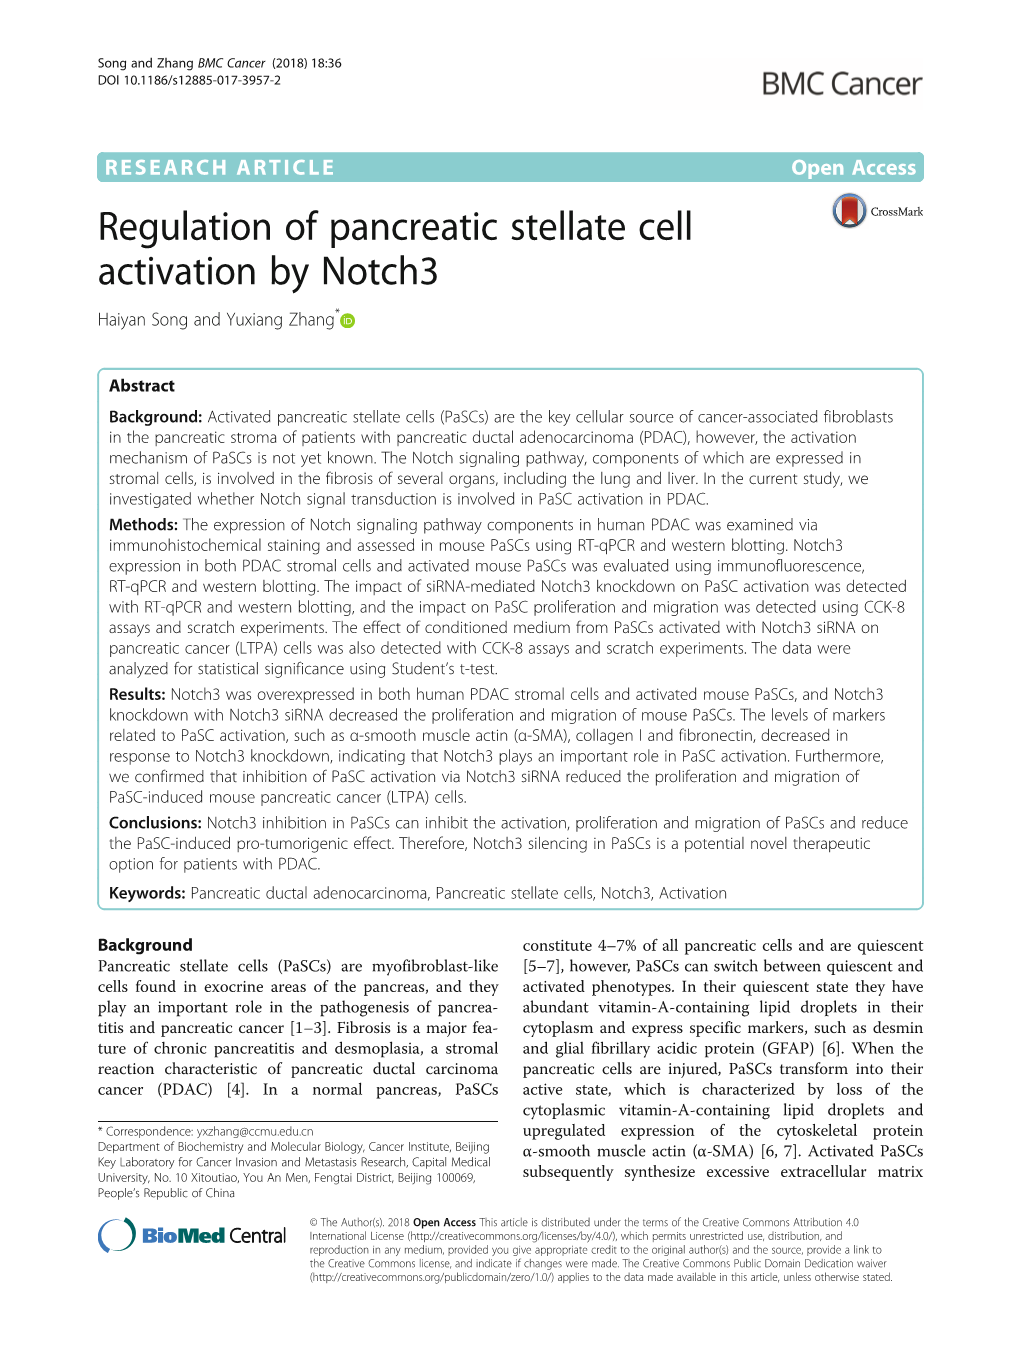 Regulation of Pancreatic Stellate Cell Activation by Notch3 Haiyan Song and Yuxiang Zhang*